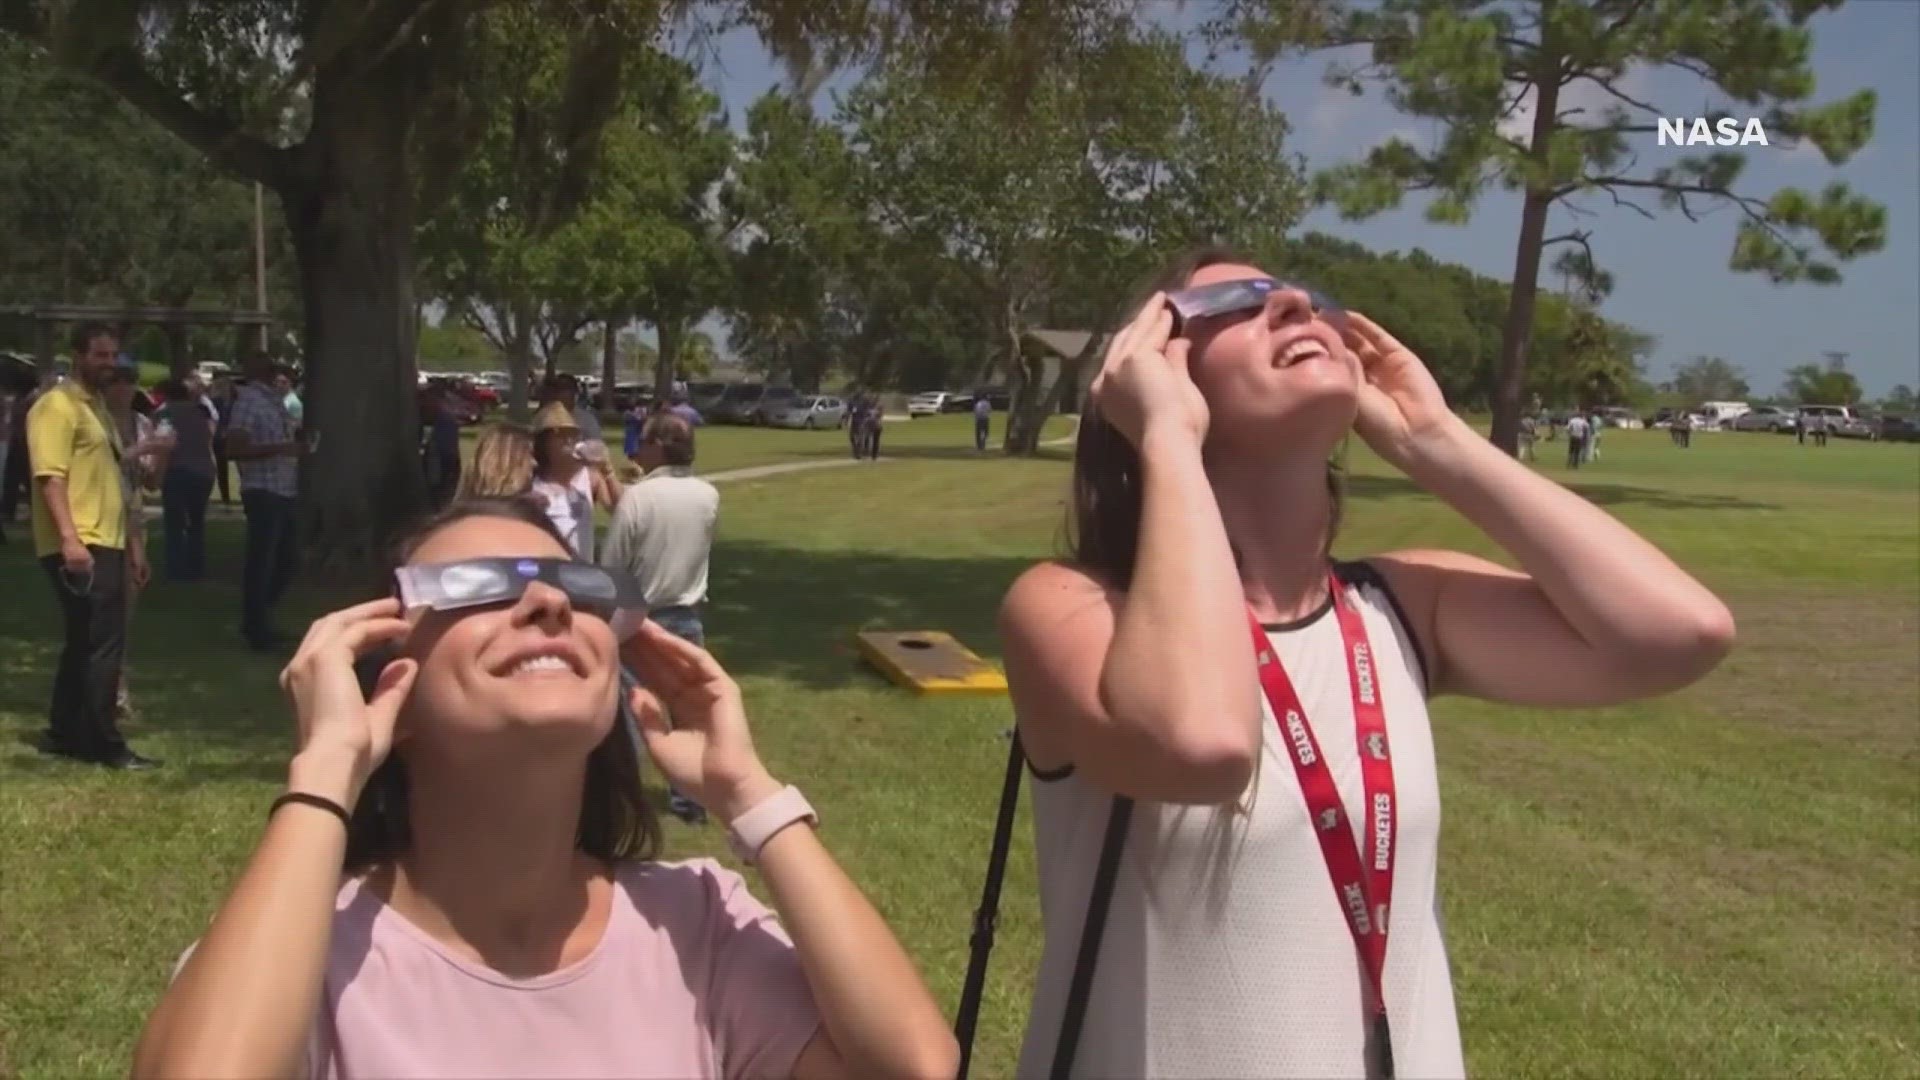 Find out how to protect your eyes during the solar eclipse in April.